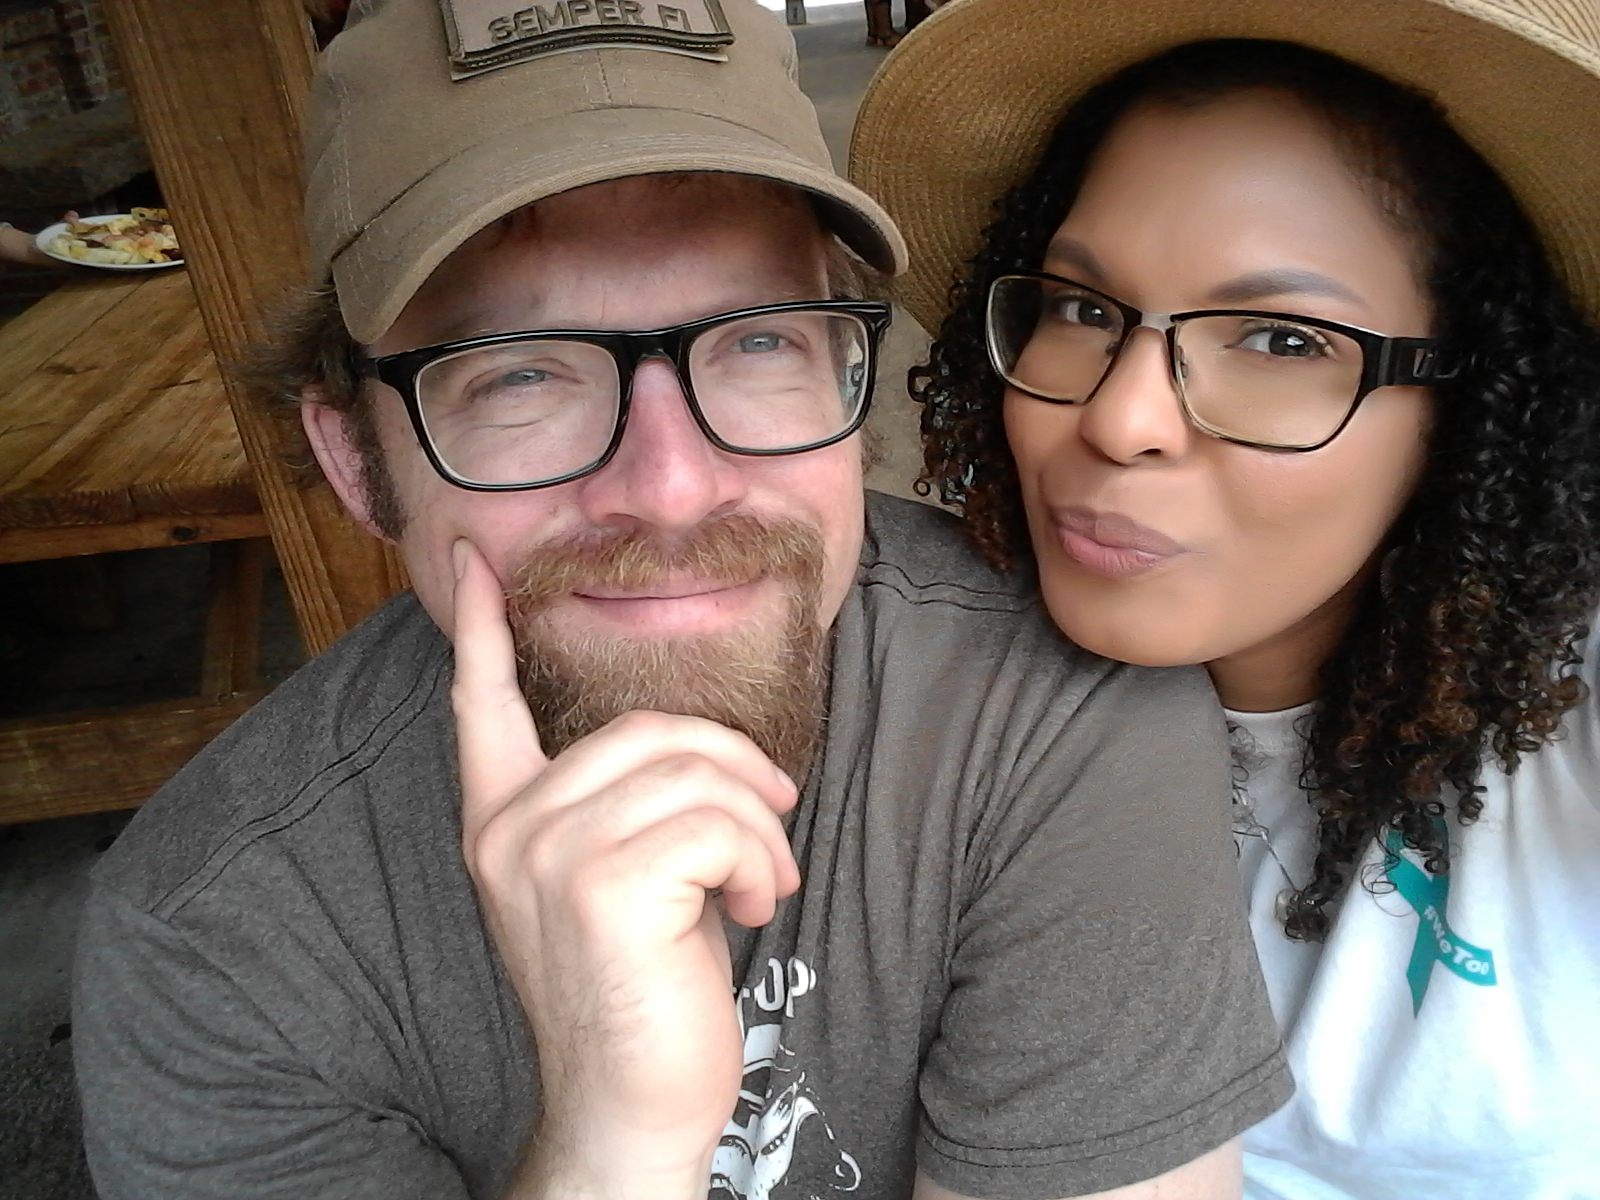 Jhan and Ian in Raleigh, North Carolina. Photo taken on May 29, 2018, their third anniversary.